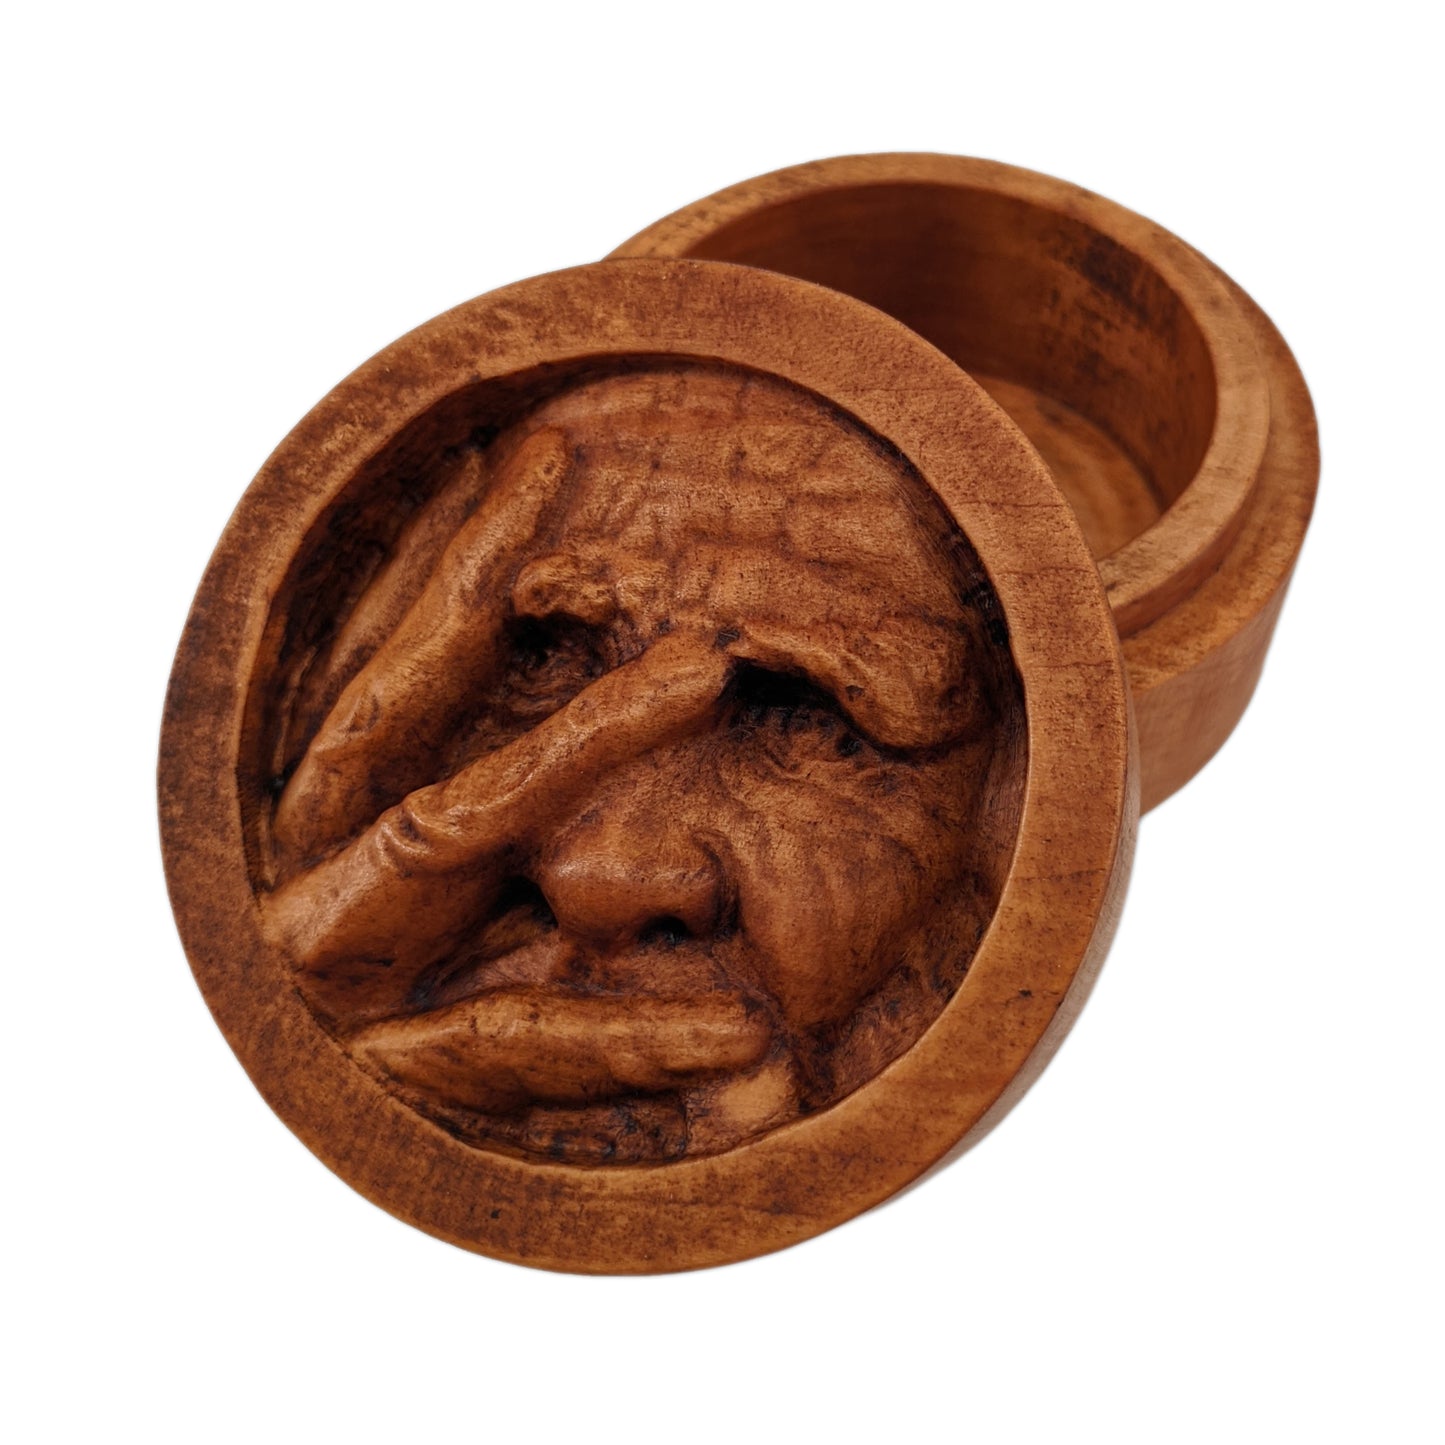 Round wooden box 3D carved with a recessed carving of an old mans face with many wrinkles and large eyebrows, with his fingers spread across and covering the right side of his face. Made from hard maple wood stained brown against a white background.